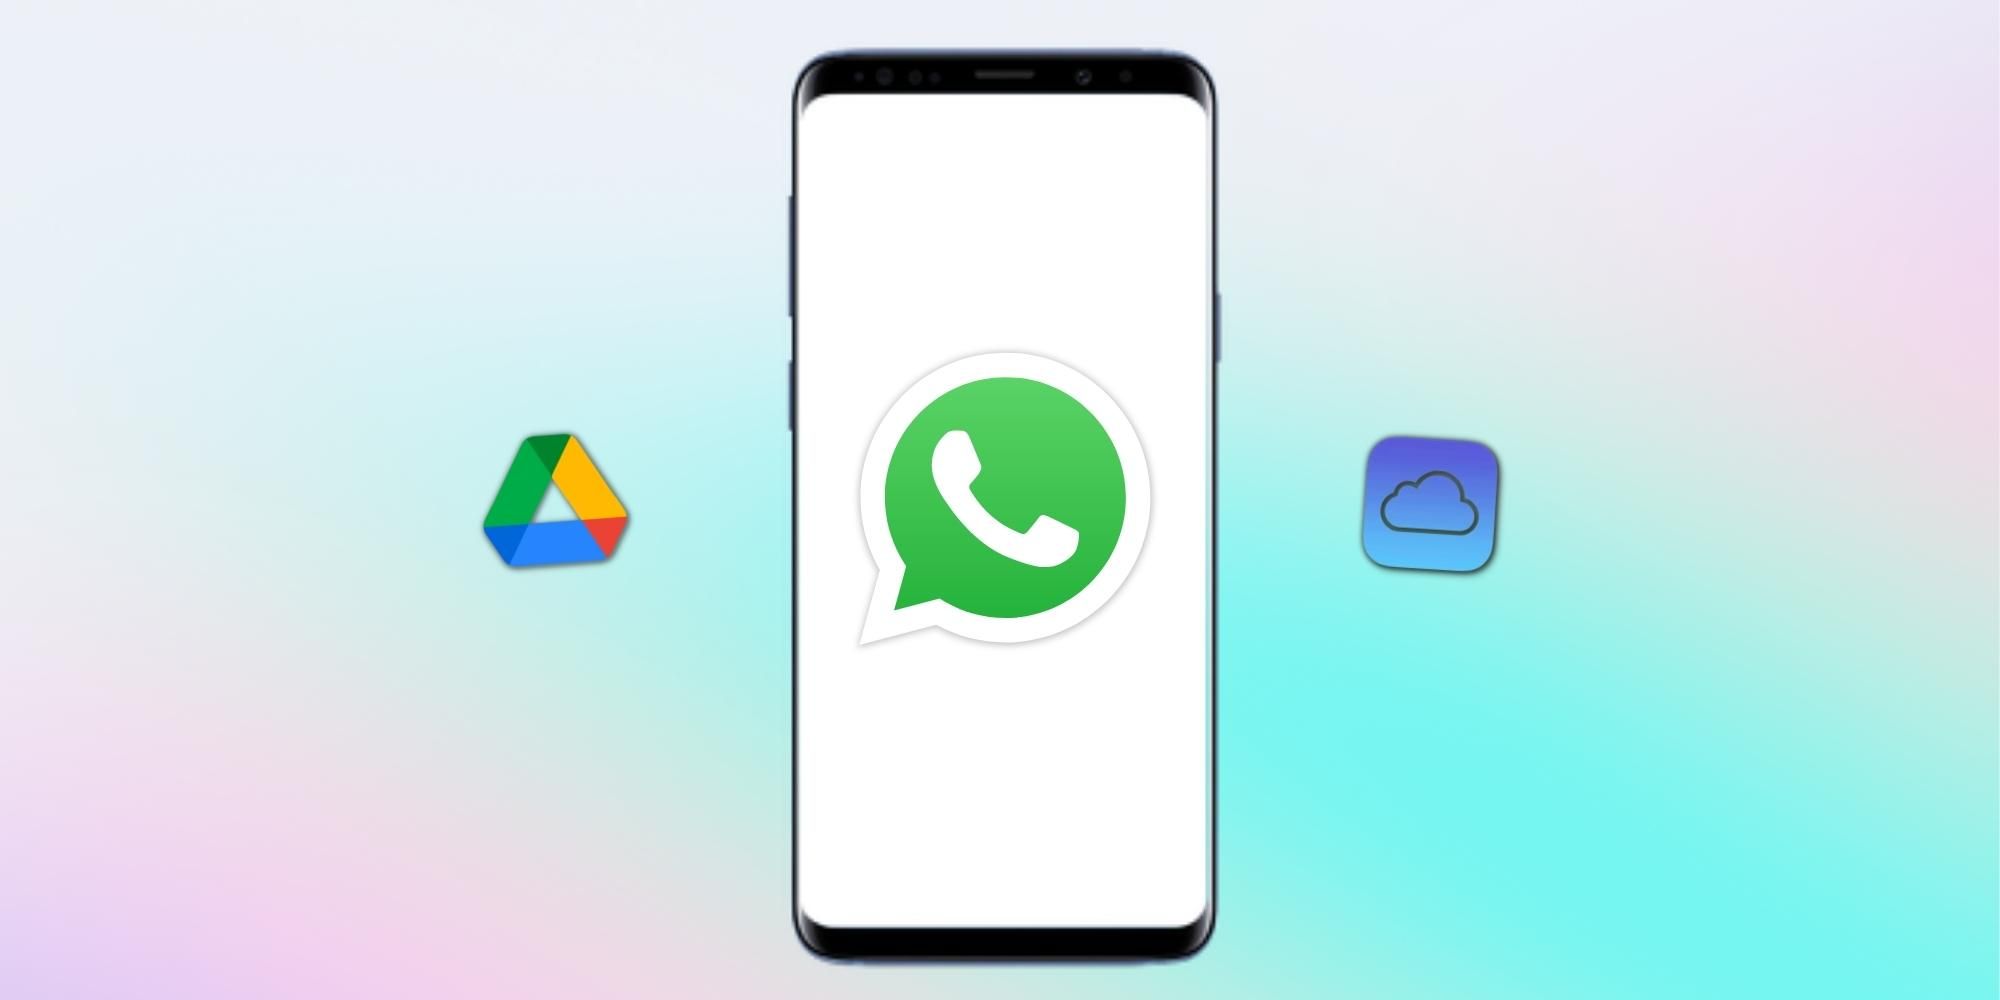 Share large files on WhatsApp